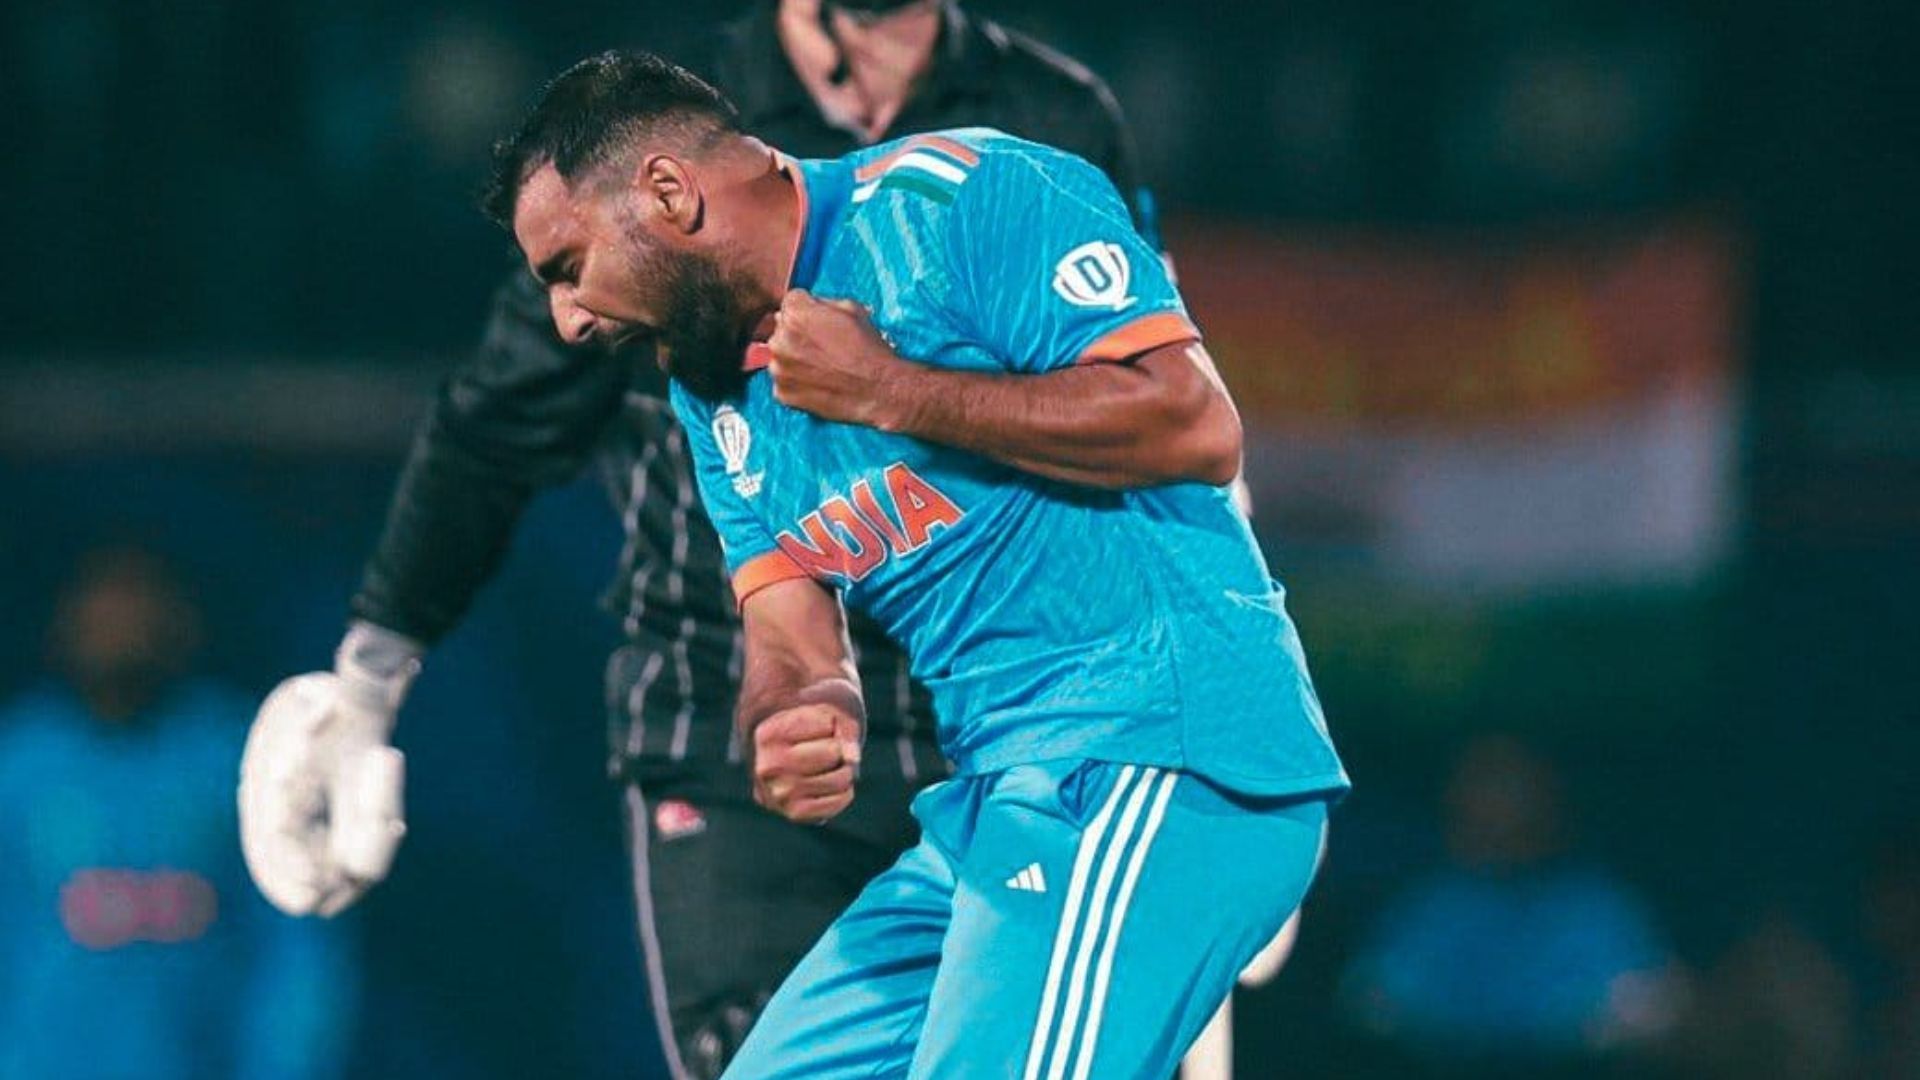 Mohammed Shami pumps his fist in celebration after knocking over Matt Henry (P.C.:X)